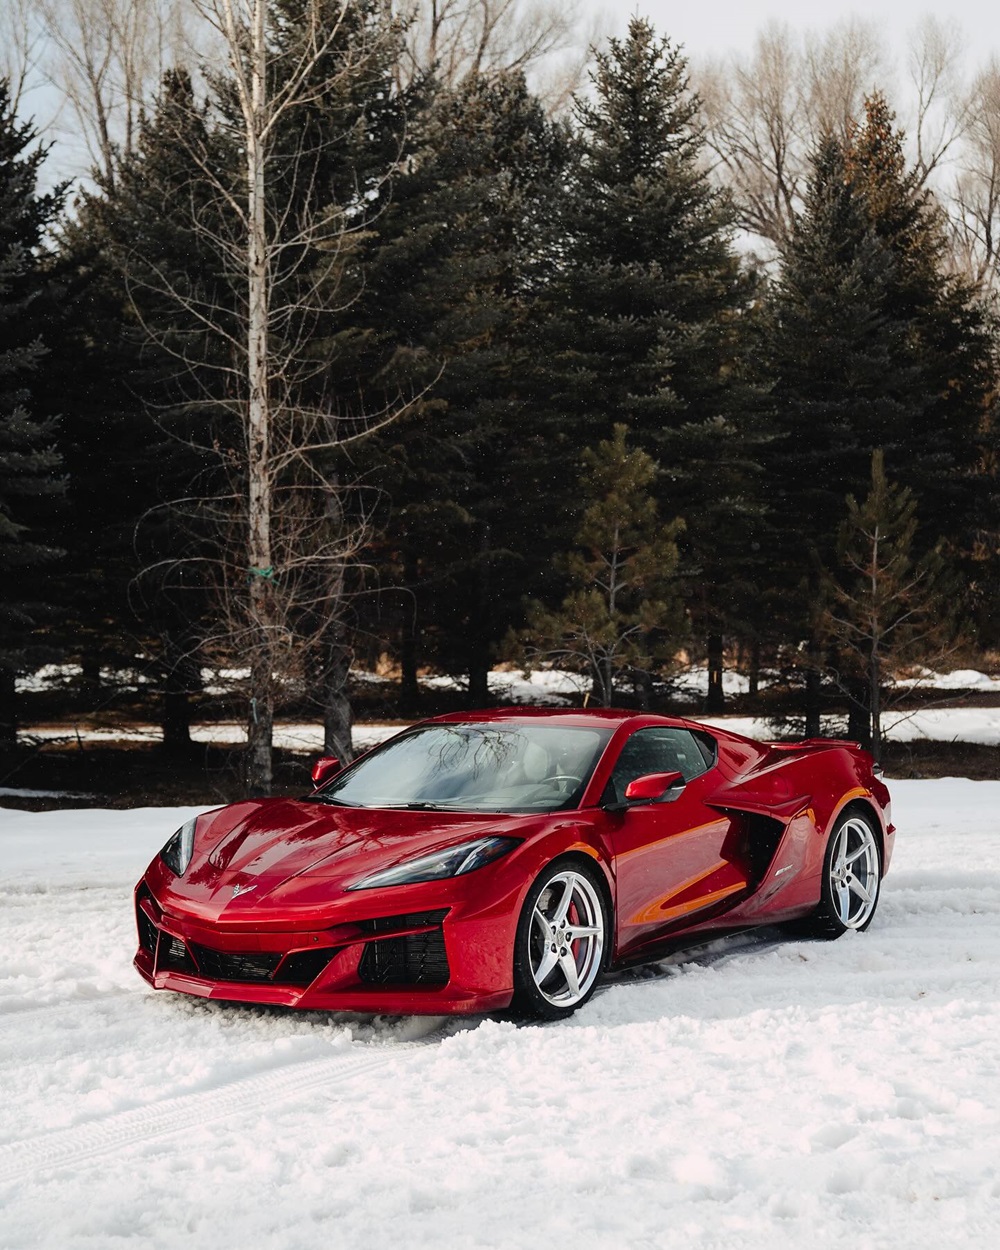 Corvette E-Ray Tackles the Snow and Ice at F.A.T. International Ice Race